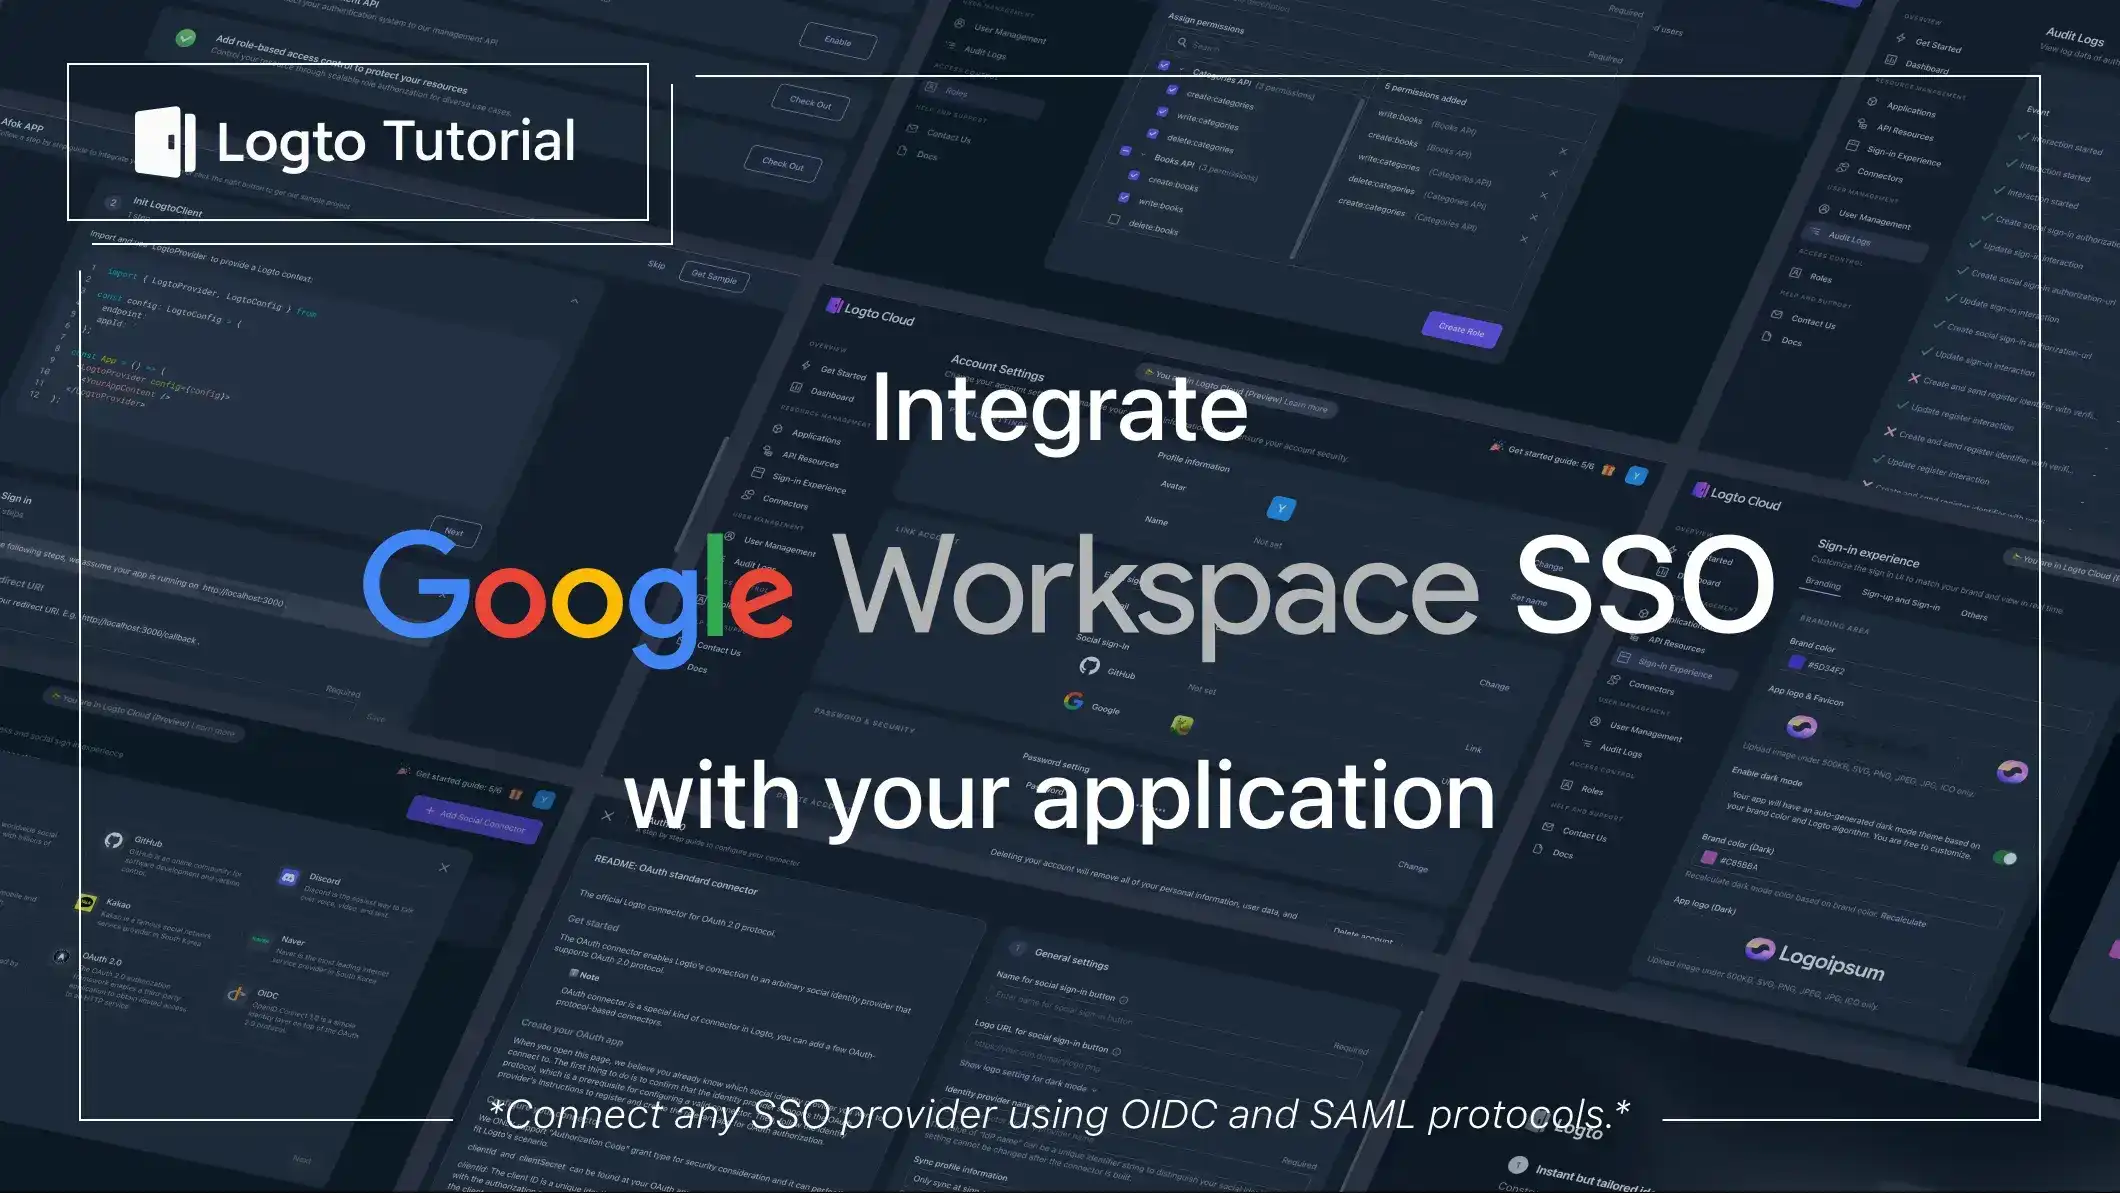 Integrate Google Workspace SSO with your application